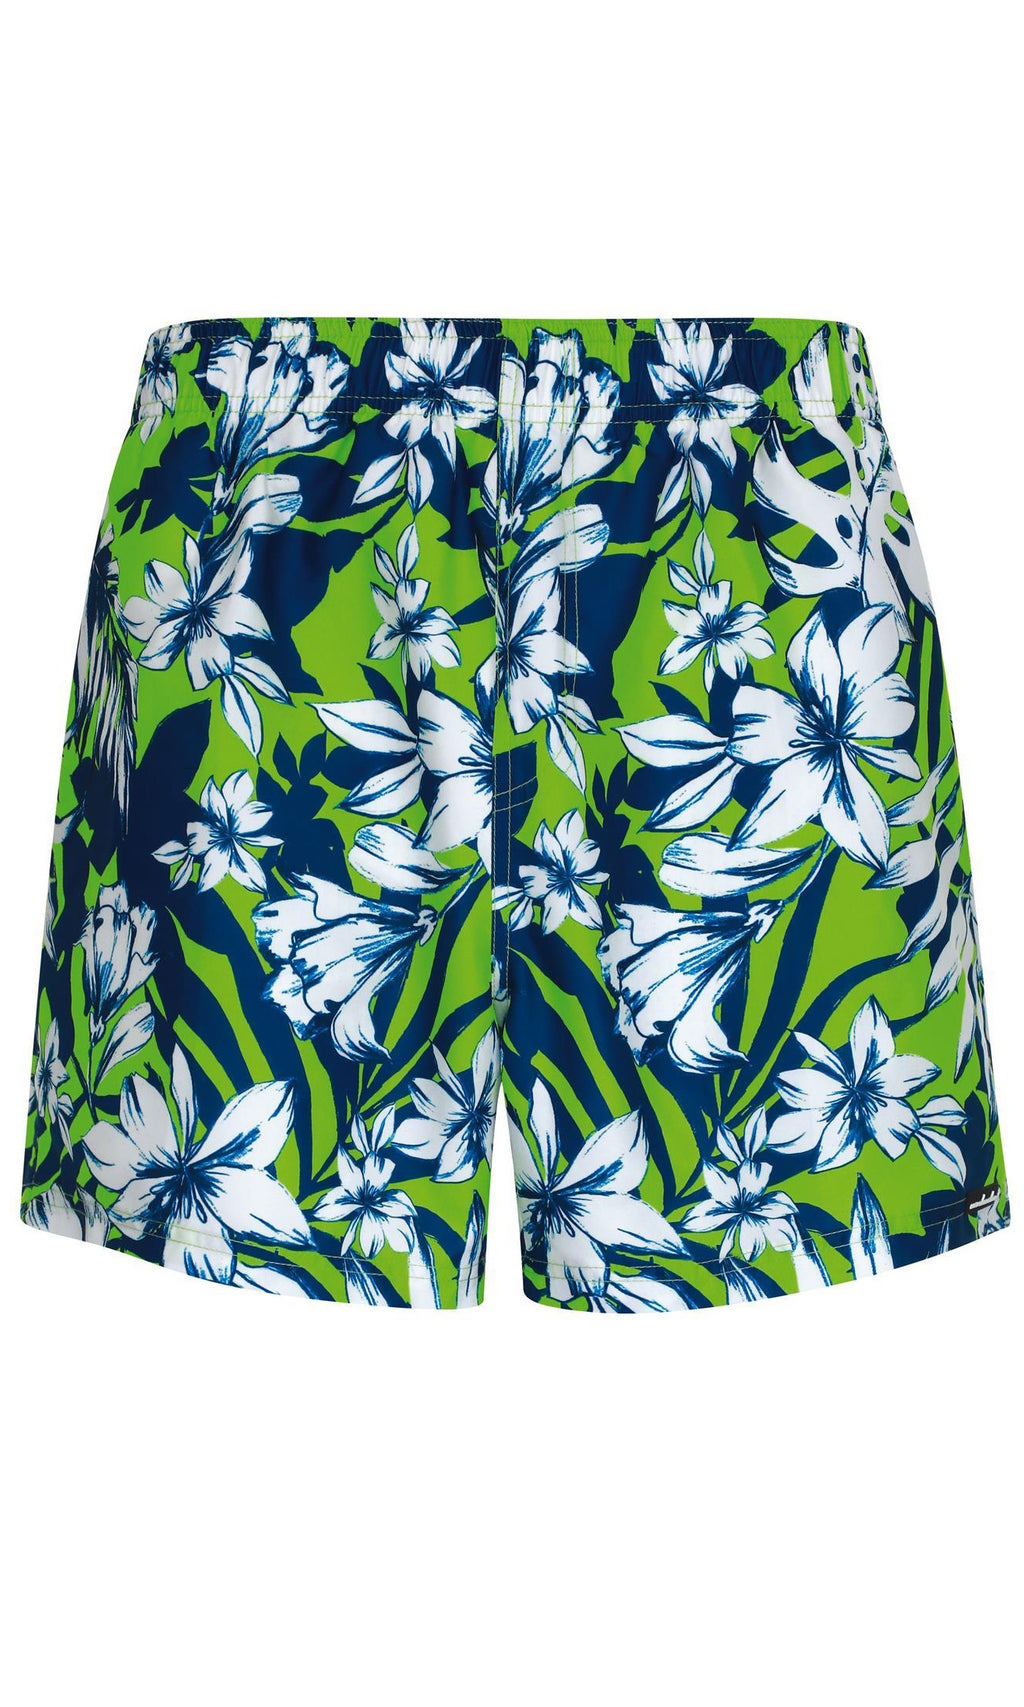 Sport Hibiscus Short, More Colours, Special Order S - 3XL